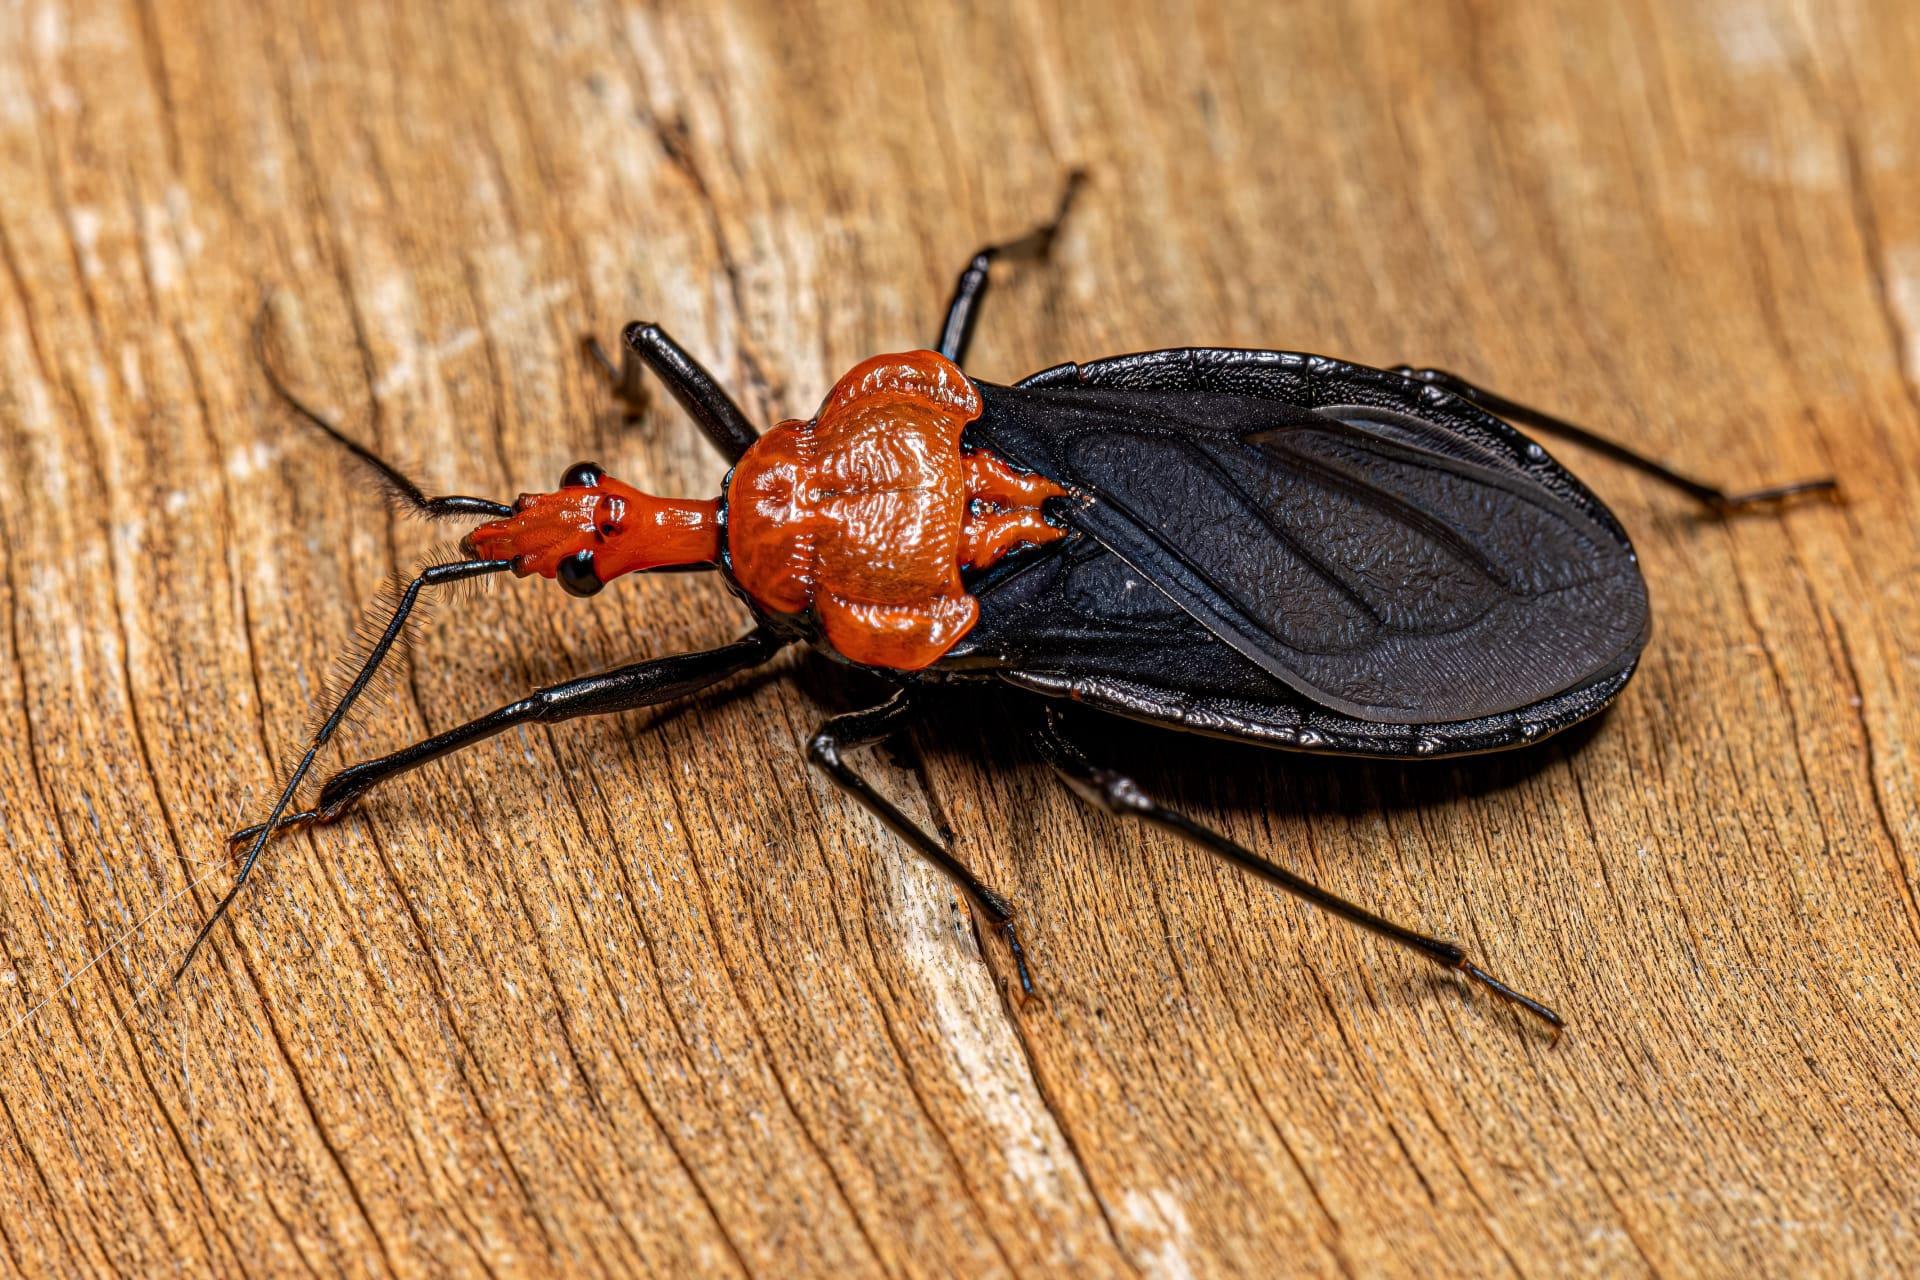 Assassin beetle pictures